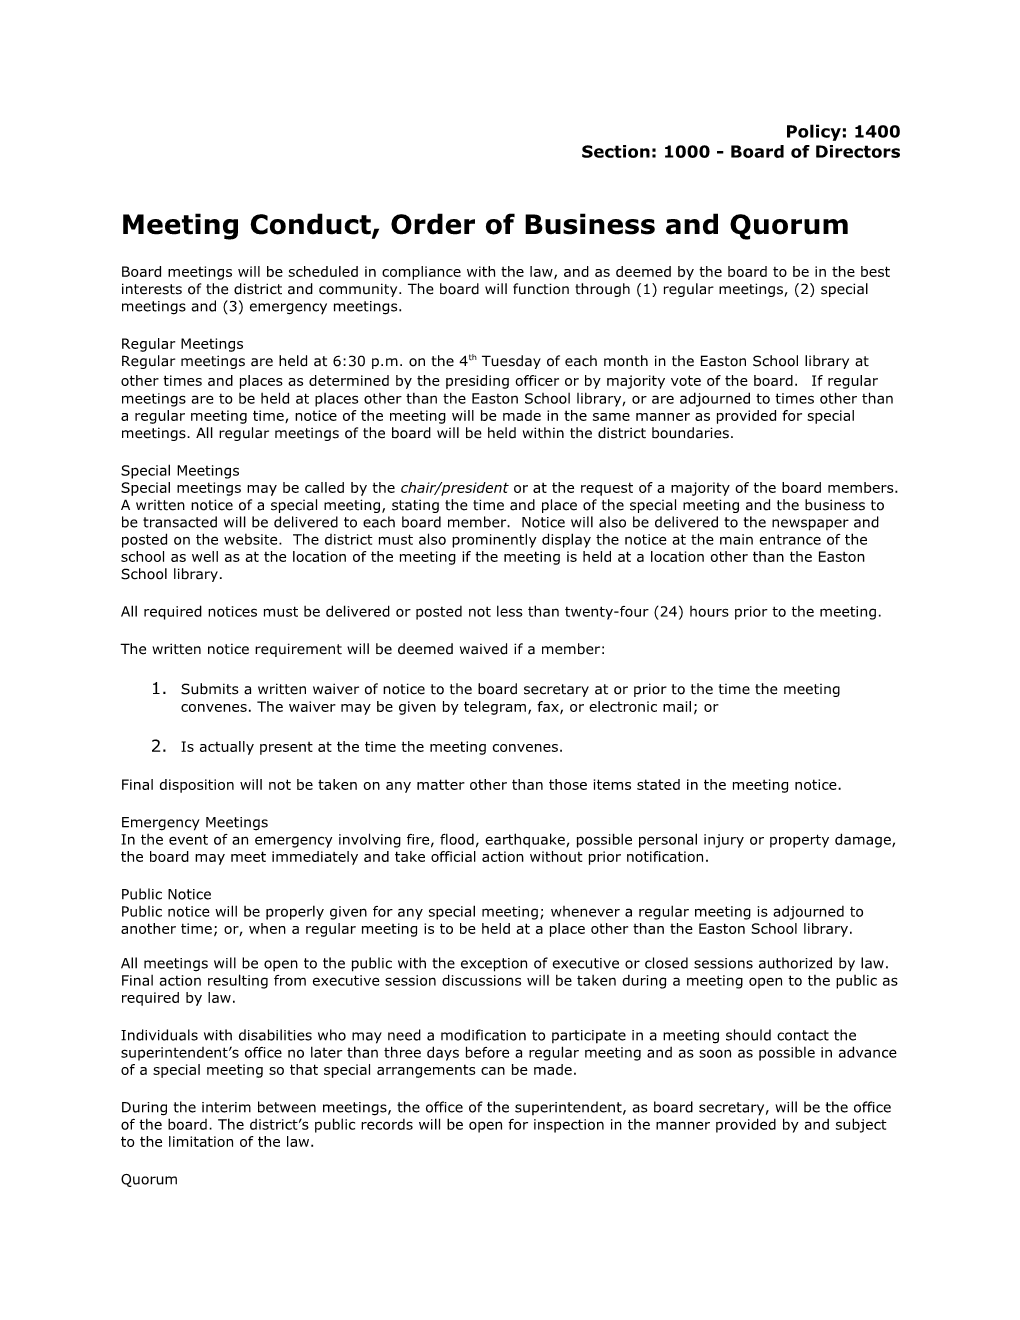 Meeting Conduct, Order of Business and Quorum